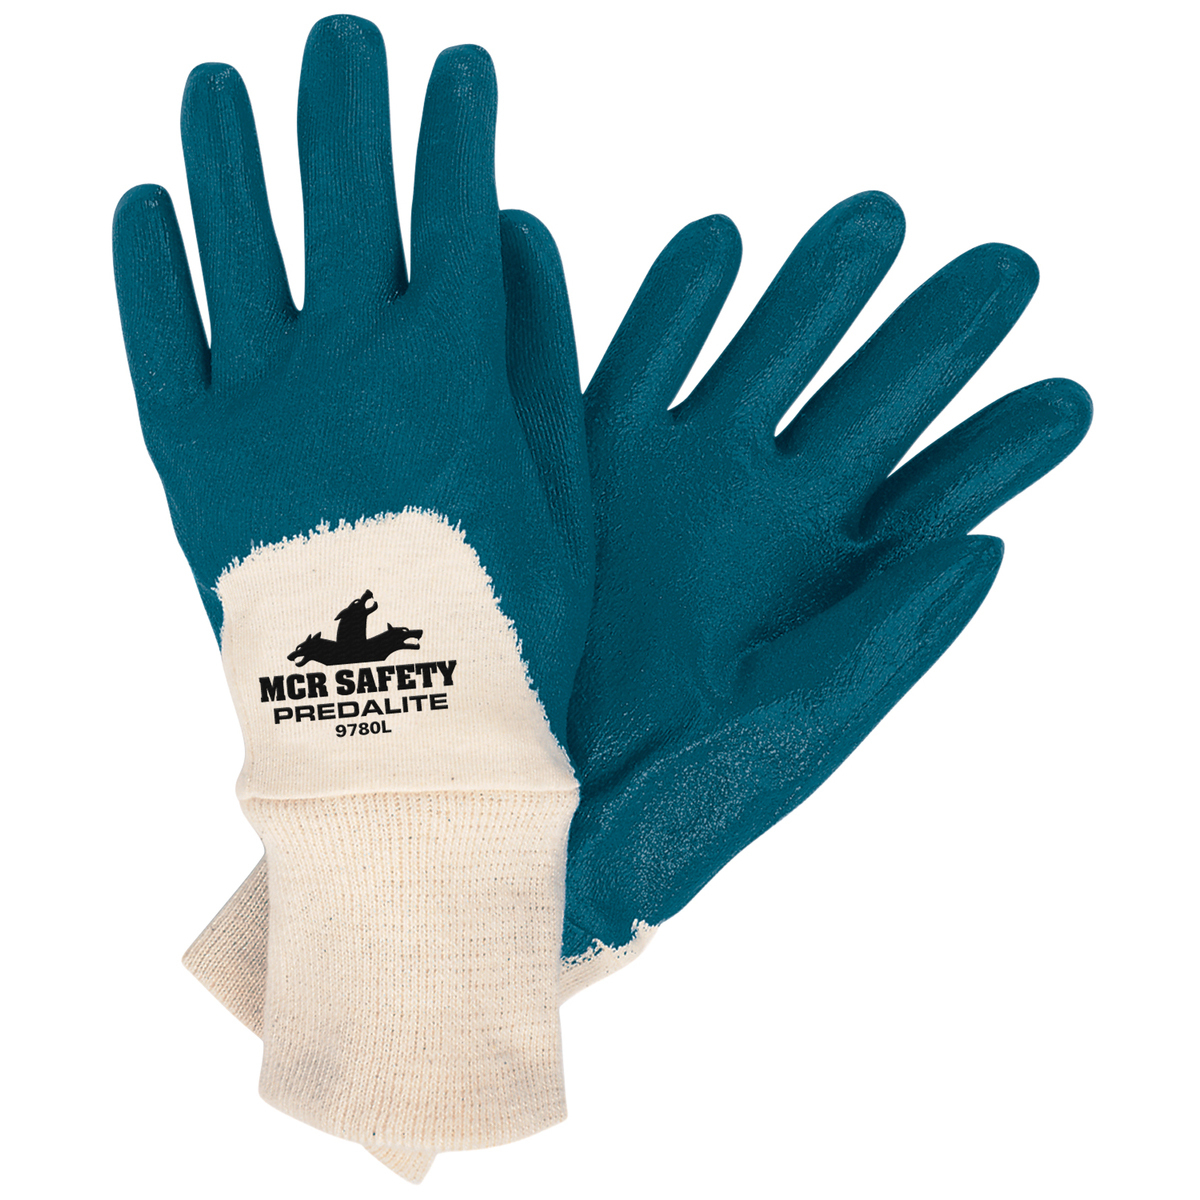 MCR Safety® Large Predalite® Blue Light Nitrile Three-Quarter Coating Work Gloves With Natural Interlock Liner And Knit Wrist